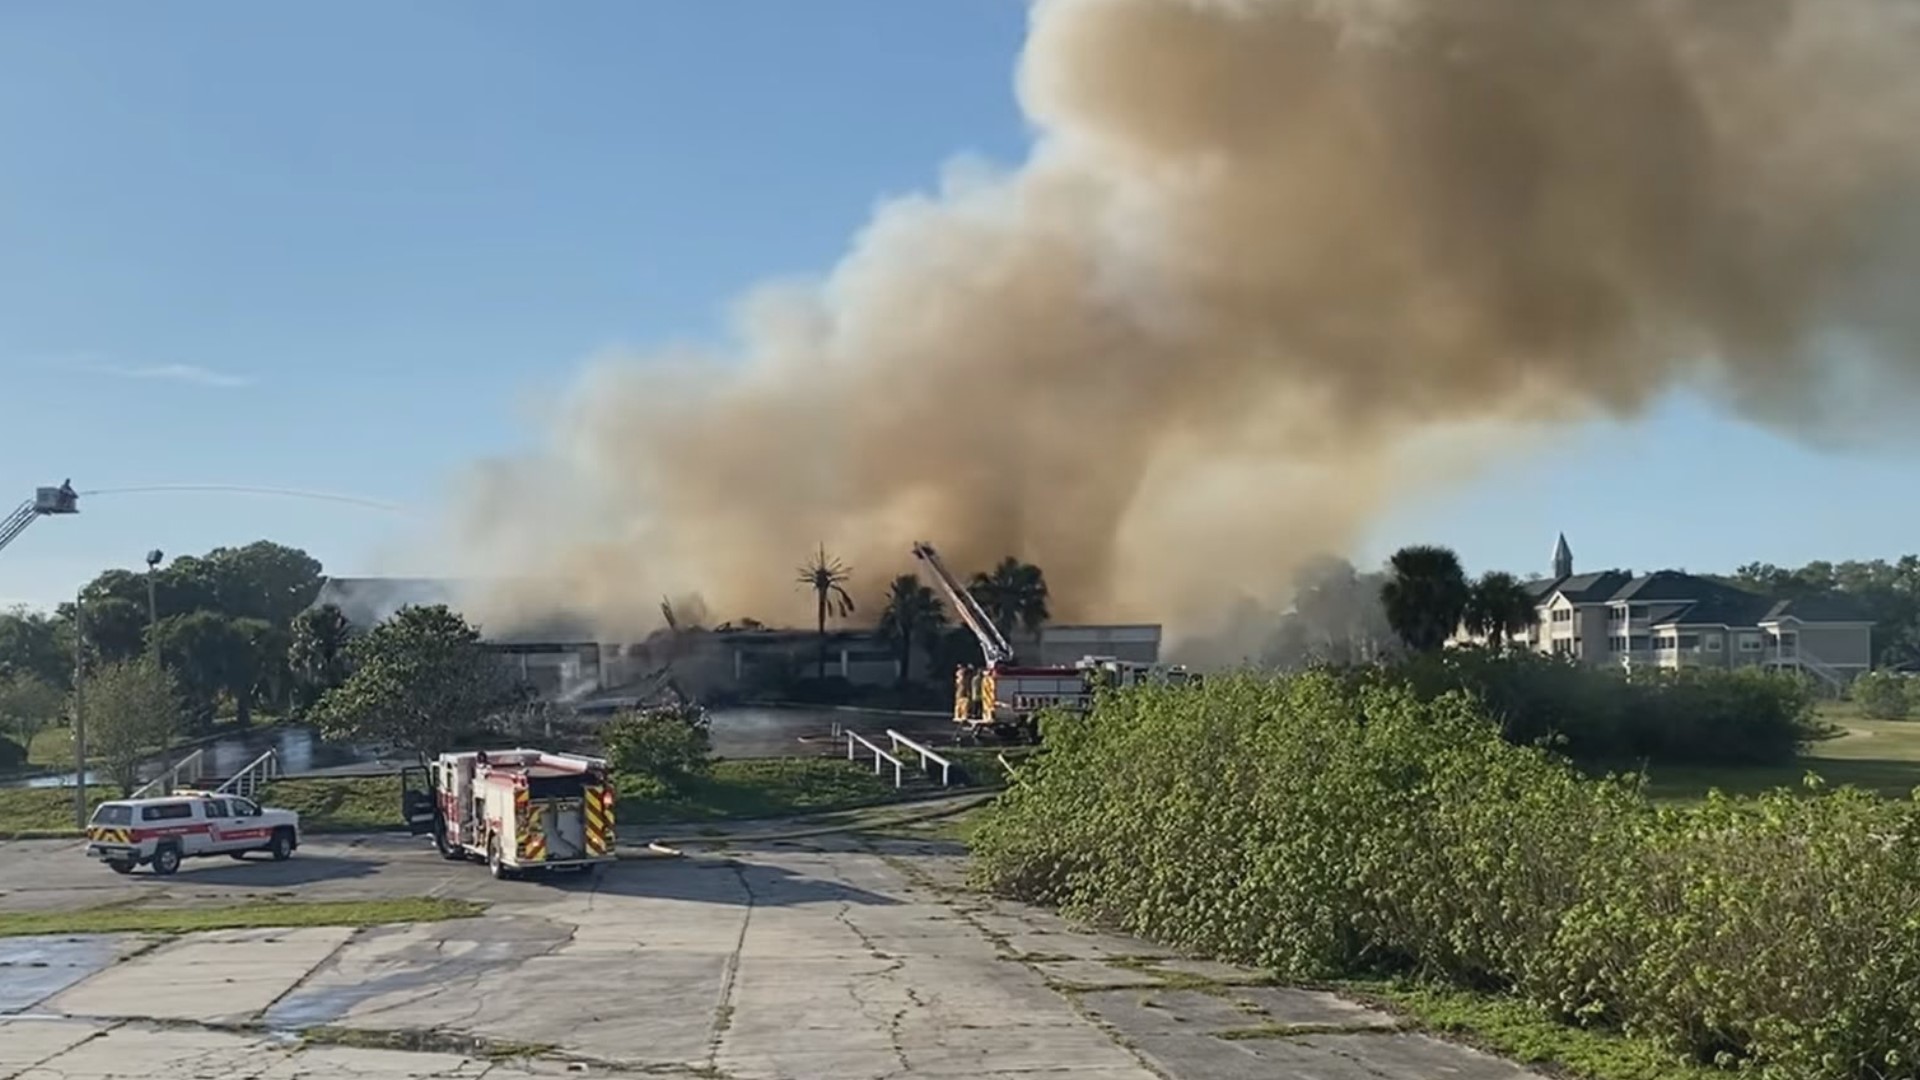 The Lakeland Fire Department posted video Saturday of crews fighting what is now considered an arson at an abandoned country club.